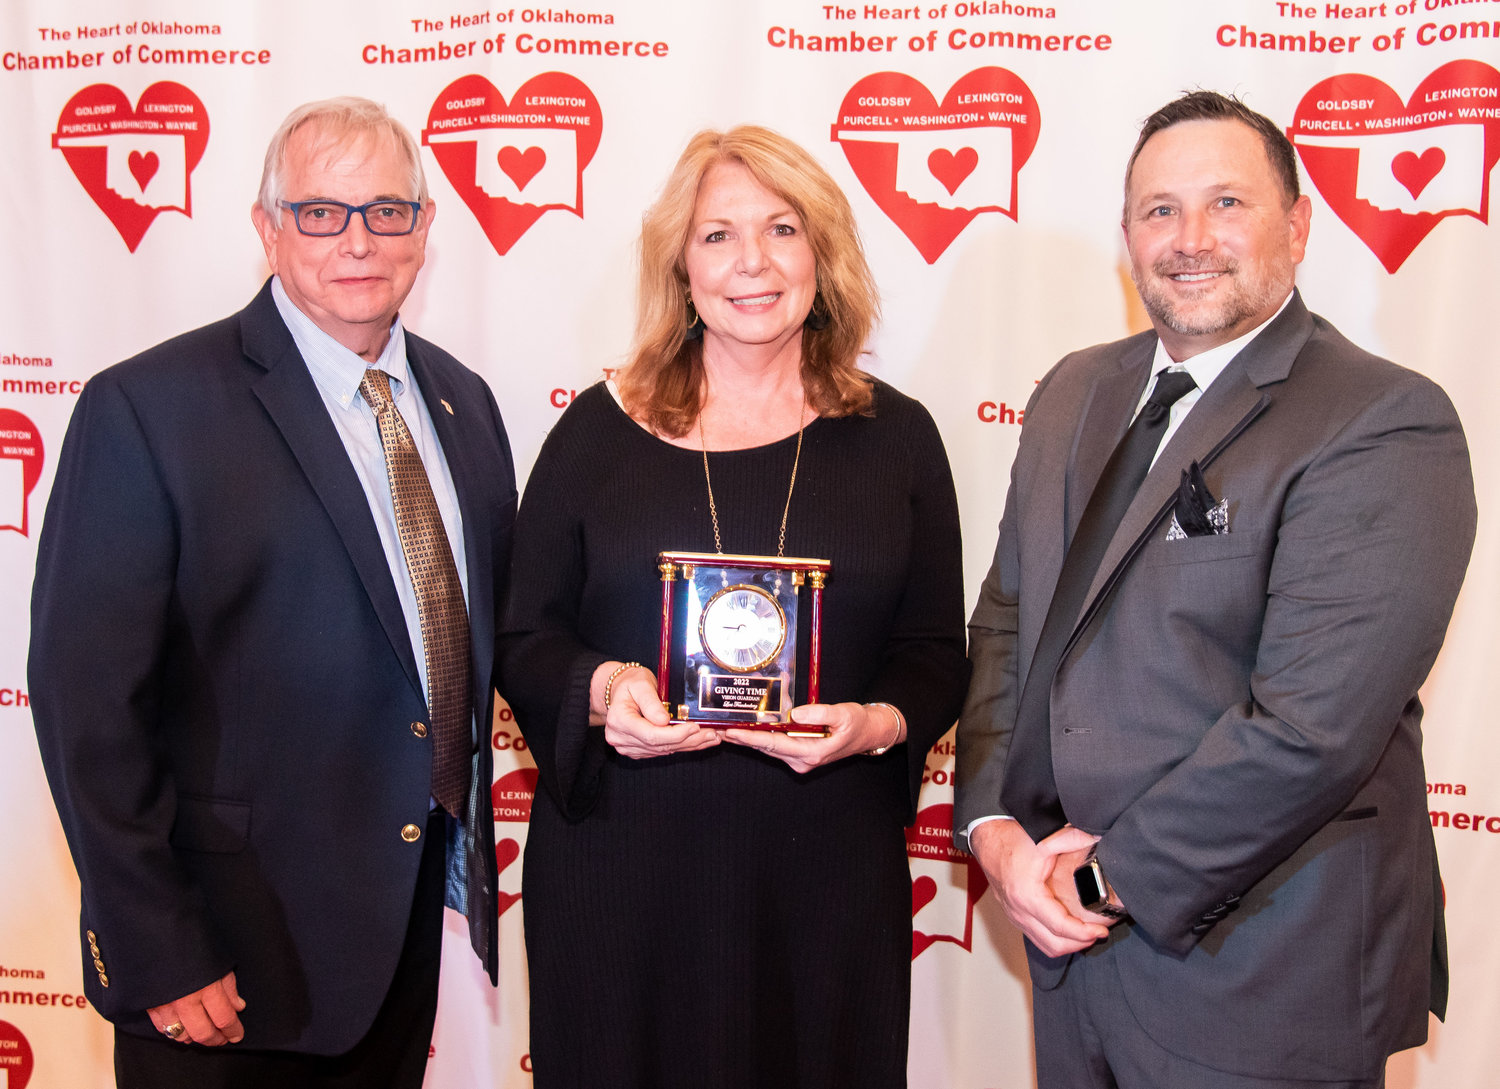 Purcell teacher Lori Frankenberg was honored at the chamber of commerce banquet as the Vision Guardian winner.  Making the presentation was City Manager Dale Bunn and Chamber President Chris Goldsby. Frankenberg teaches at the Purcell Intermediate School. The Vision Guardian Award is presented annually to an individual who exemplifies distinguished leadership in education.